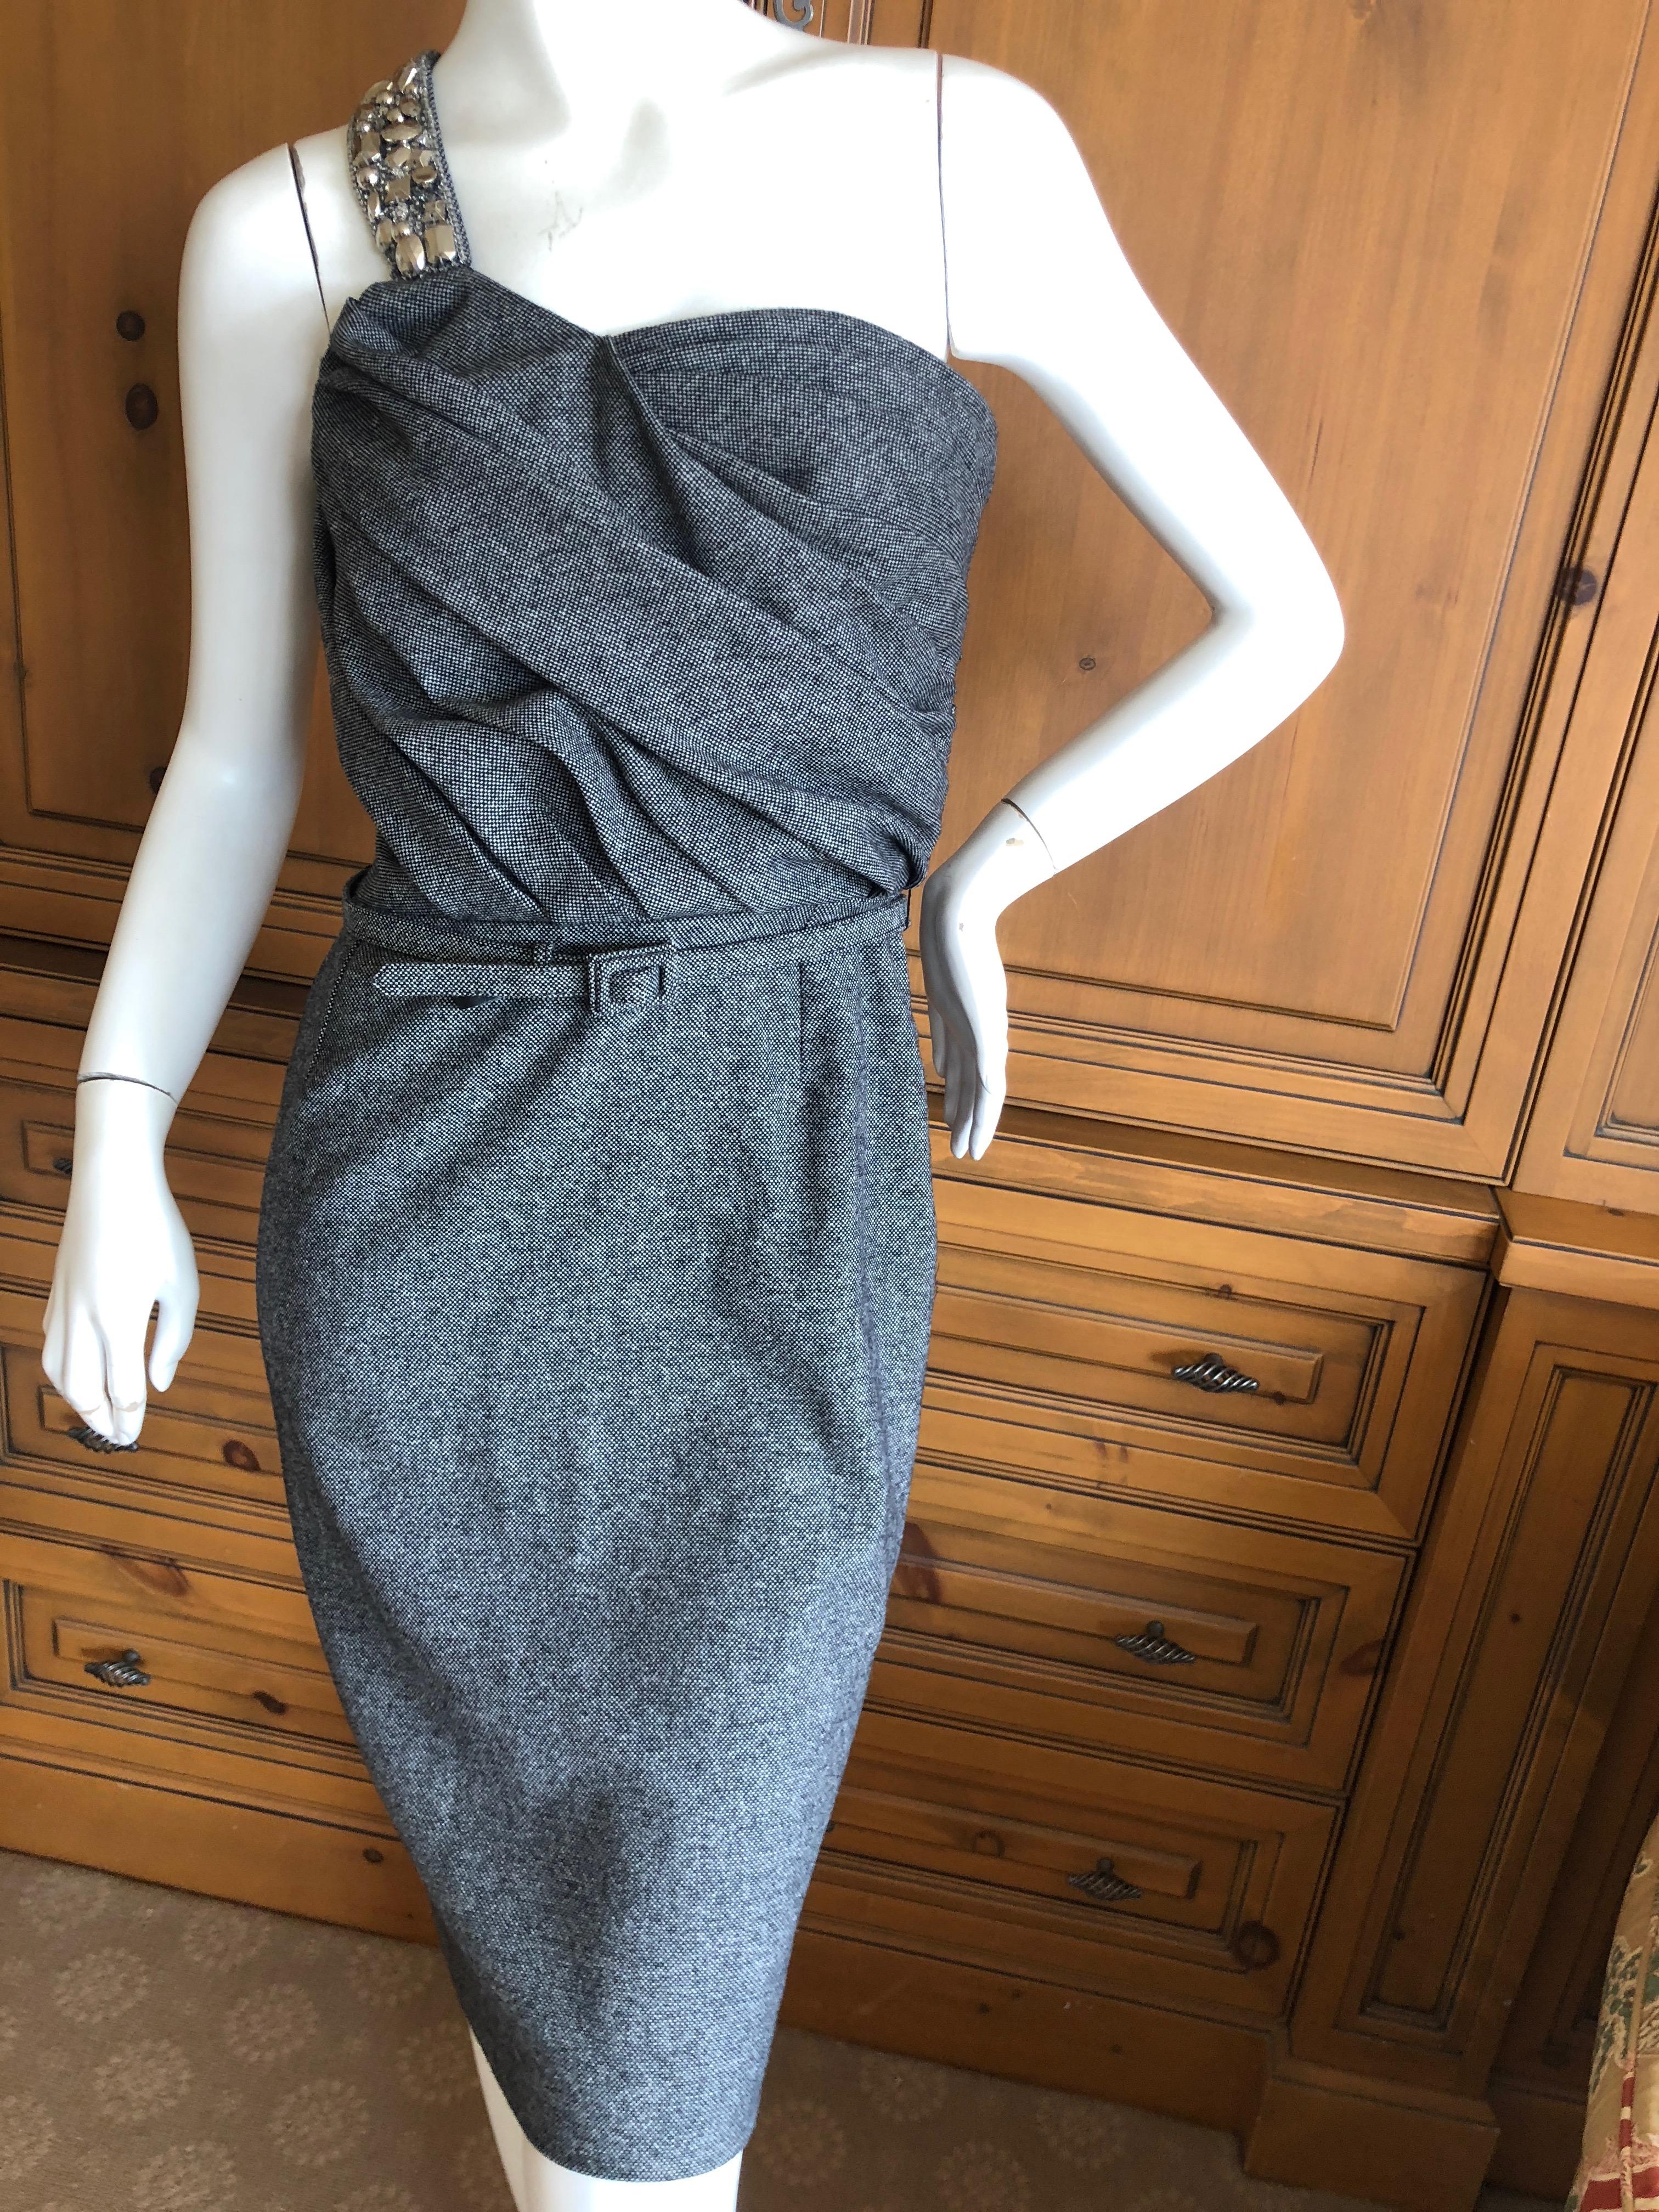 Women's Christian Dior John Galliano Gray Tweed Cocktail Dress with Jewel Shoulder Strap For Sale